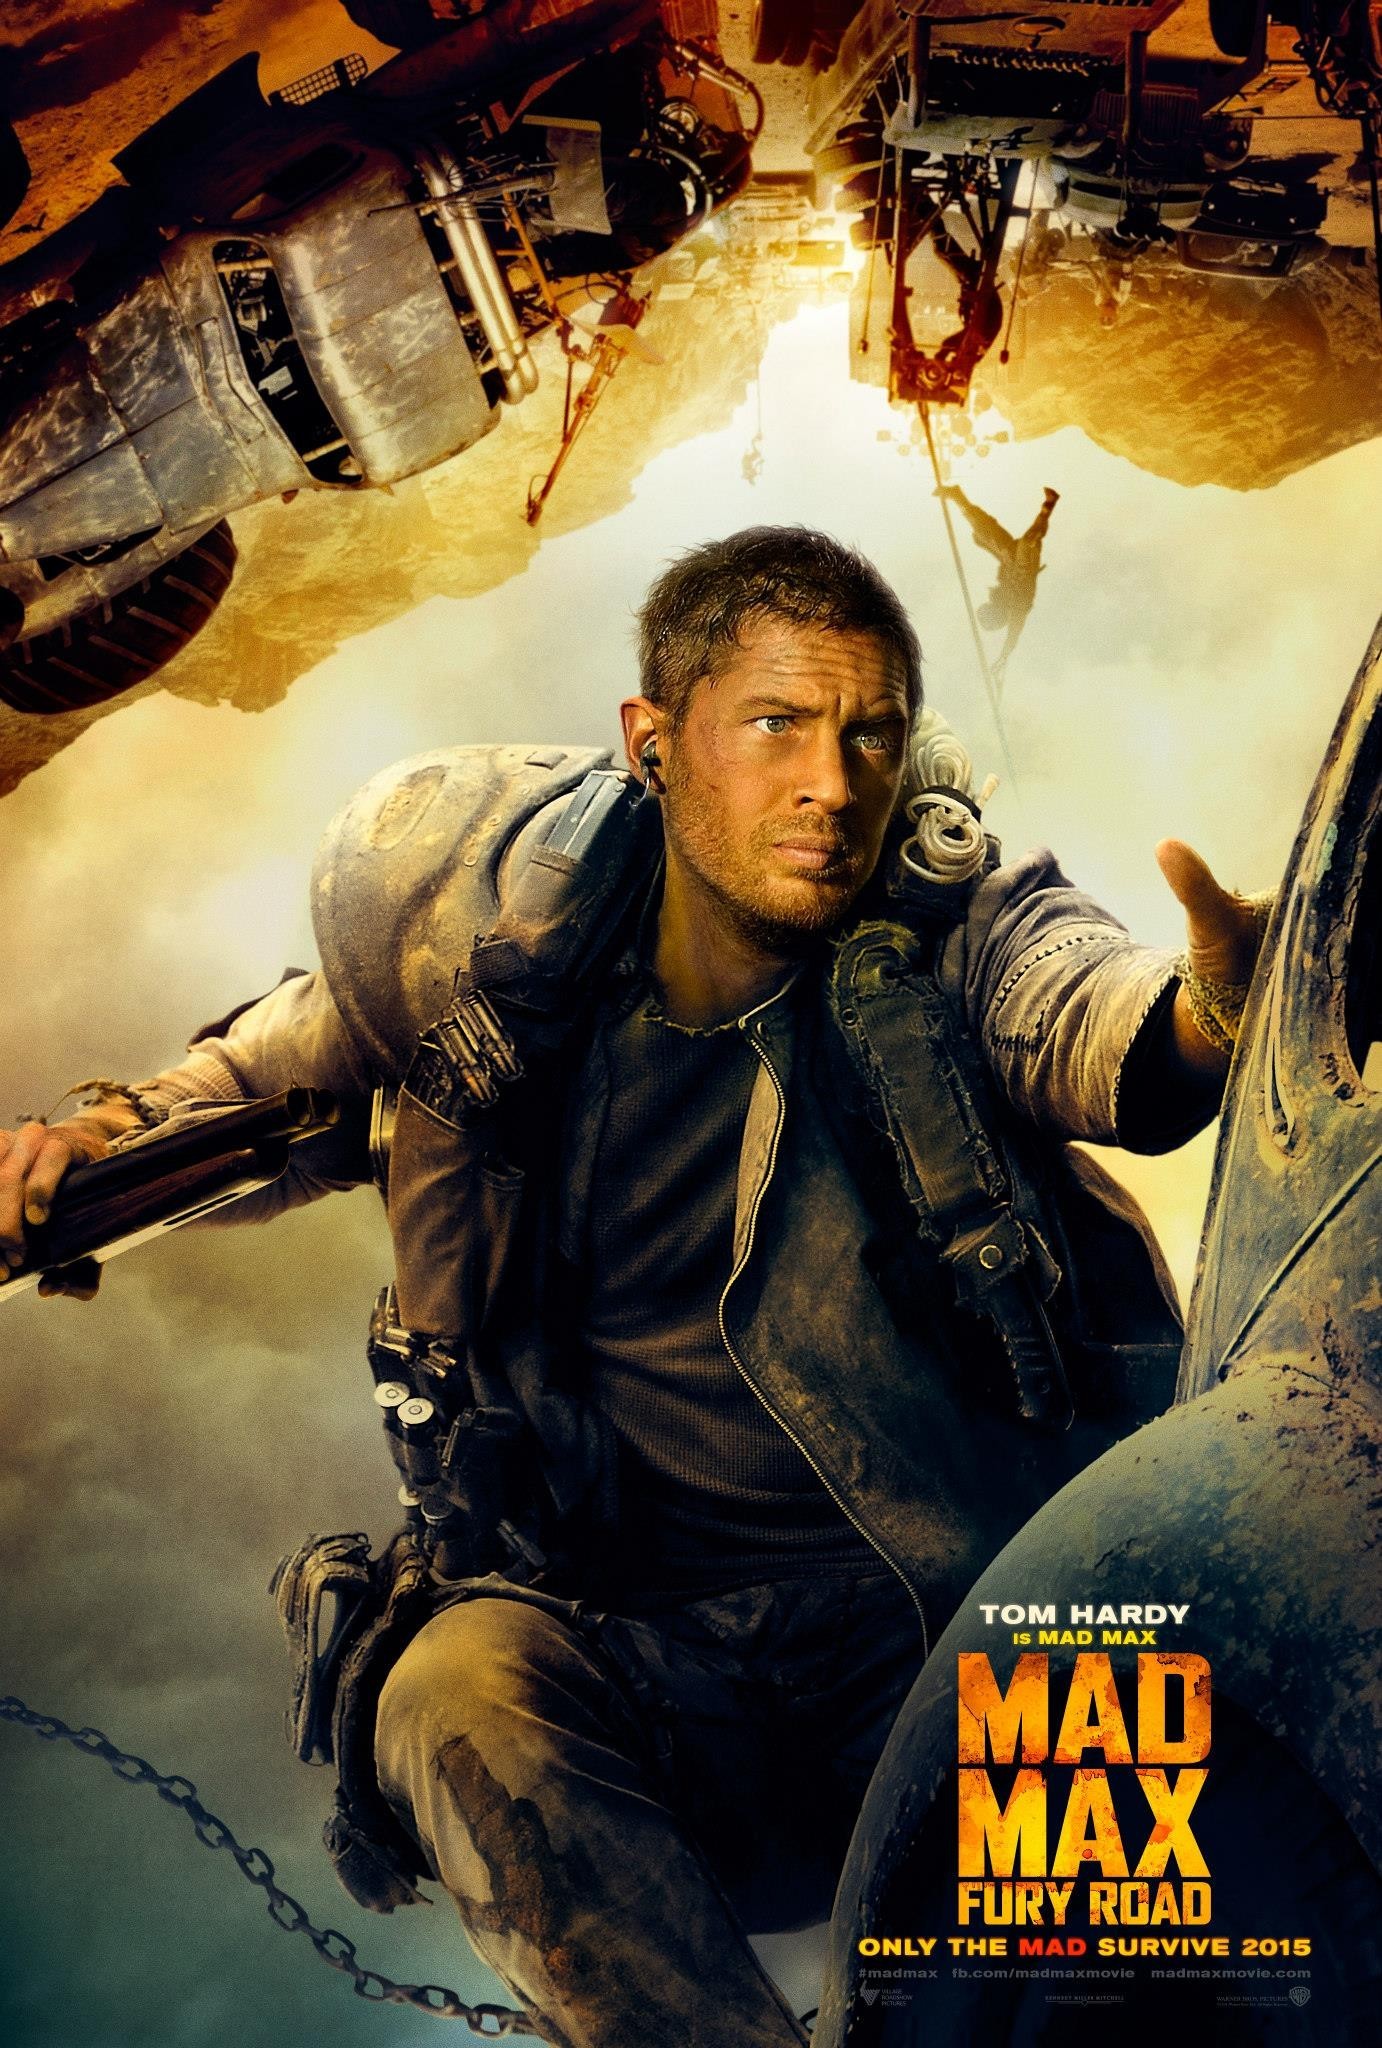 People 1382x2048 Mad Max: Fury Road movies Tom Hardy Mad Max movie poster men